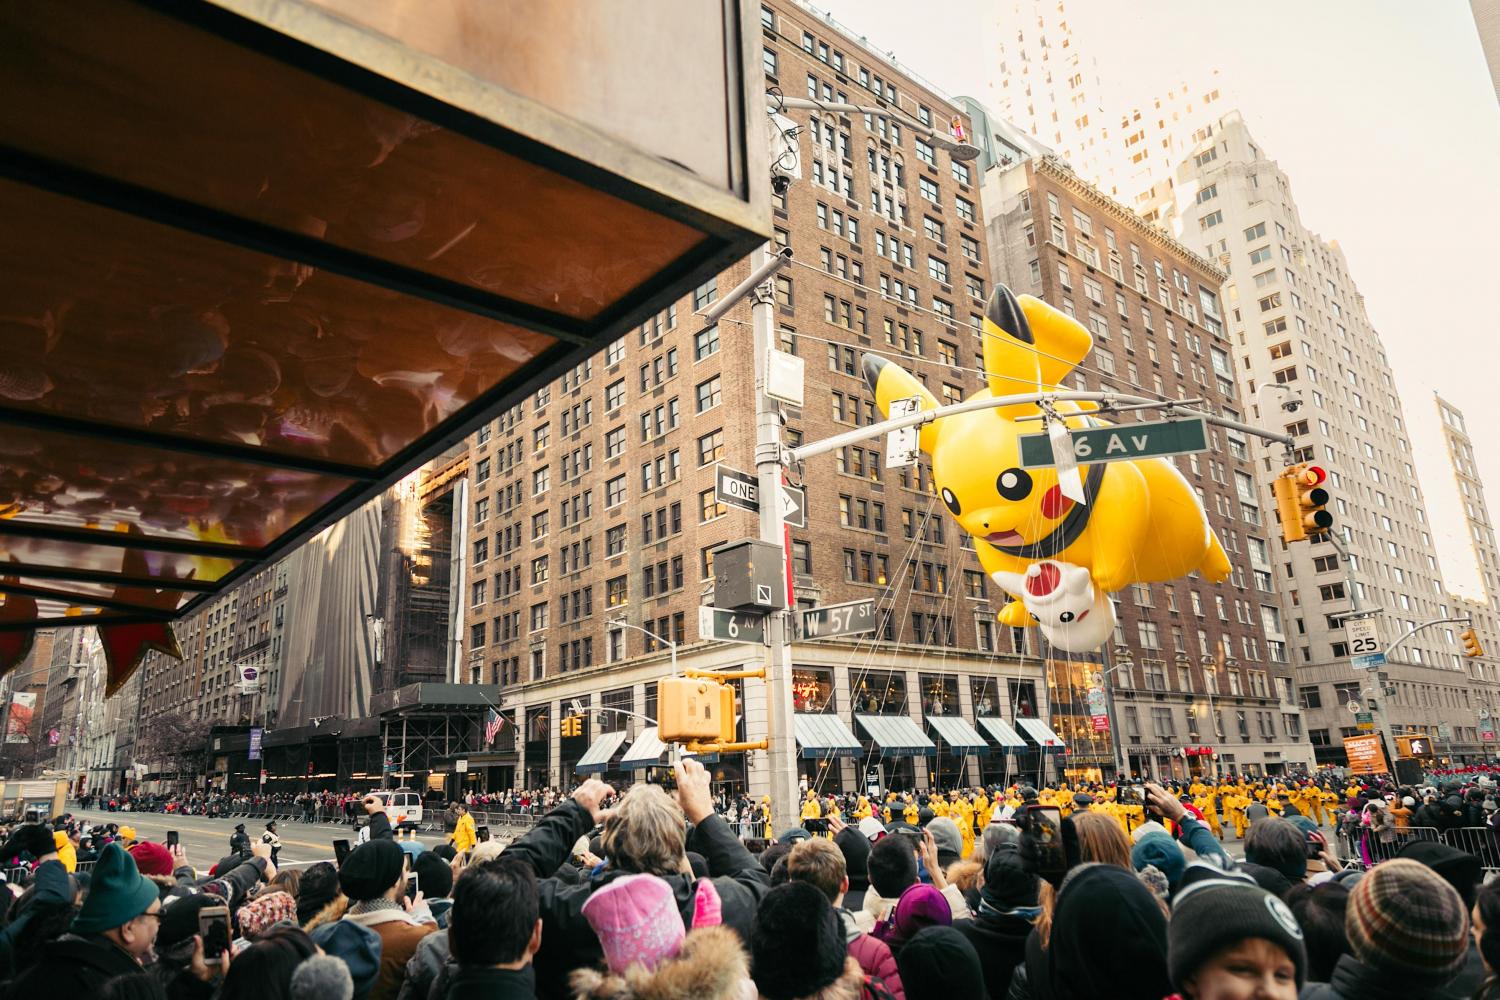 Thanksgiving Parade Private Viewing Brunch
Thu Nov 24, 8:00 AM - Thu Nov 24, 12:00 PM
in 37 days